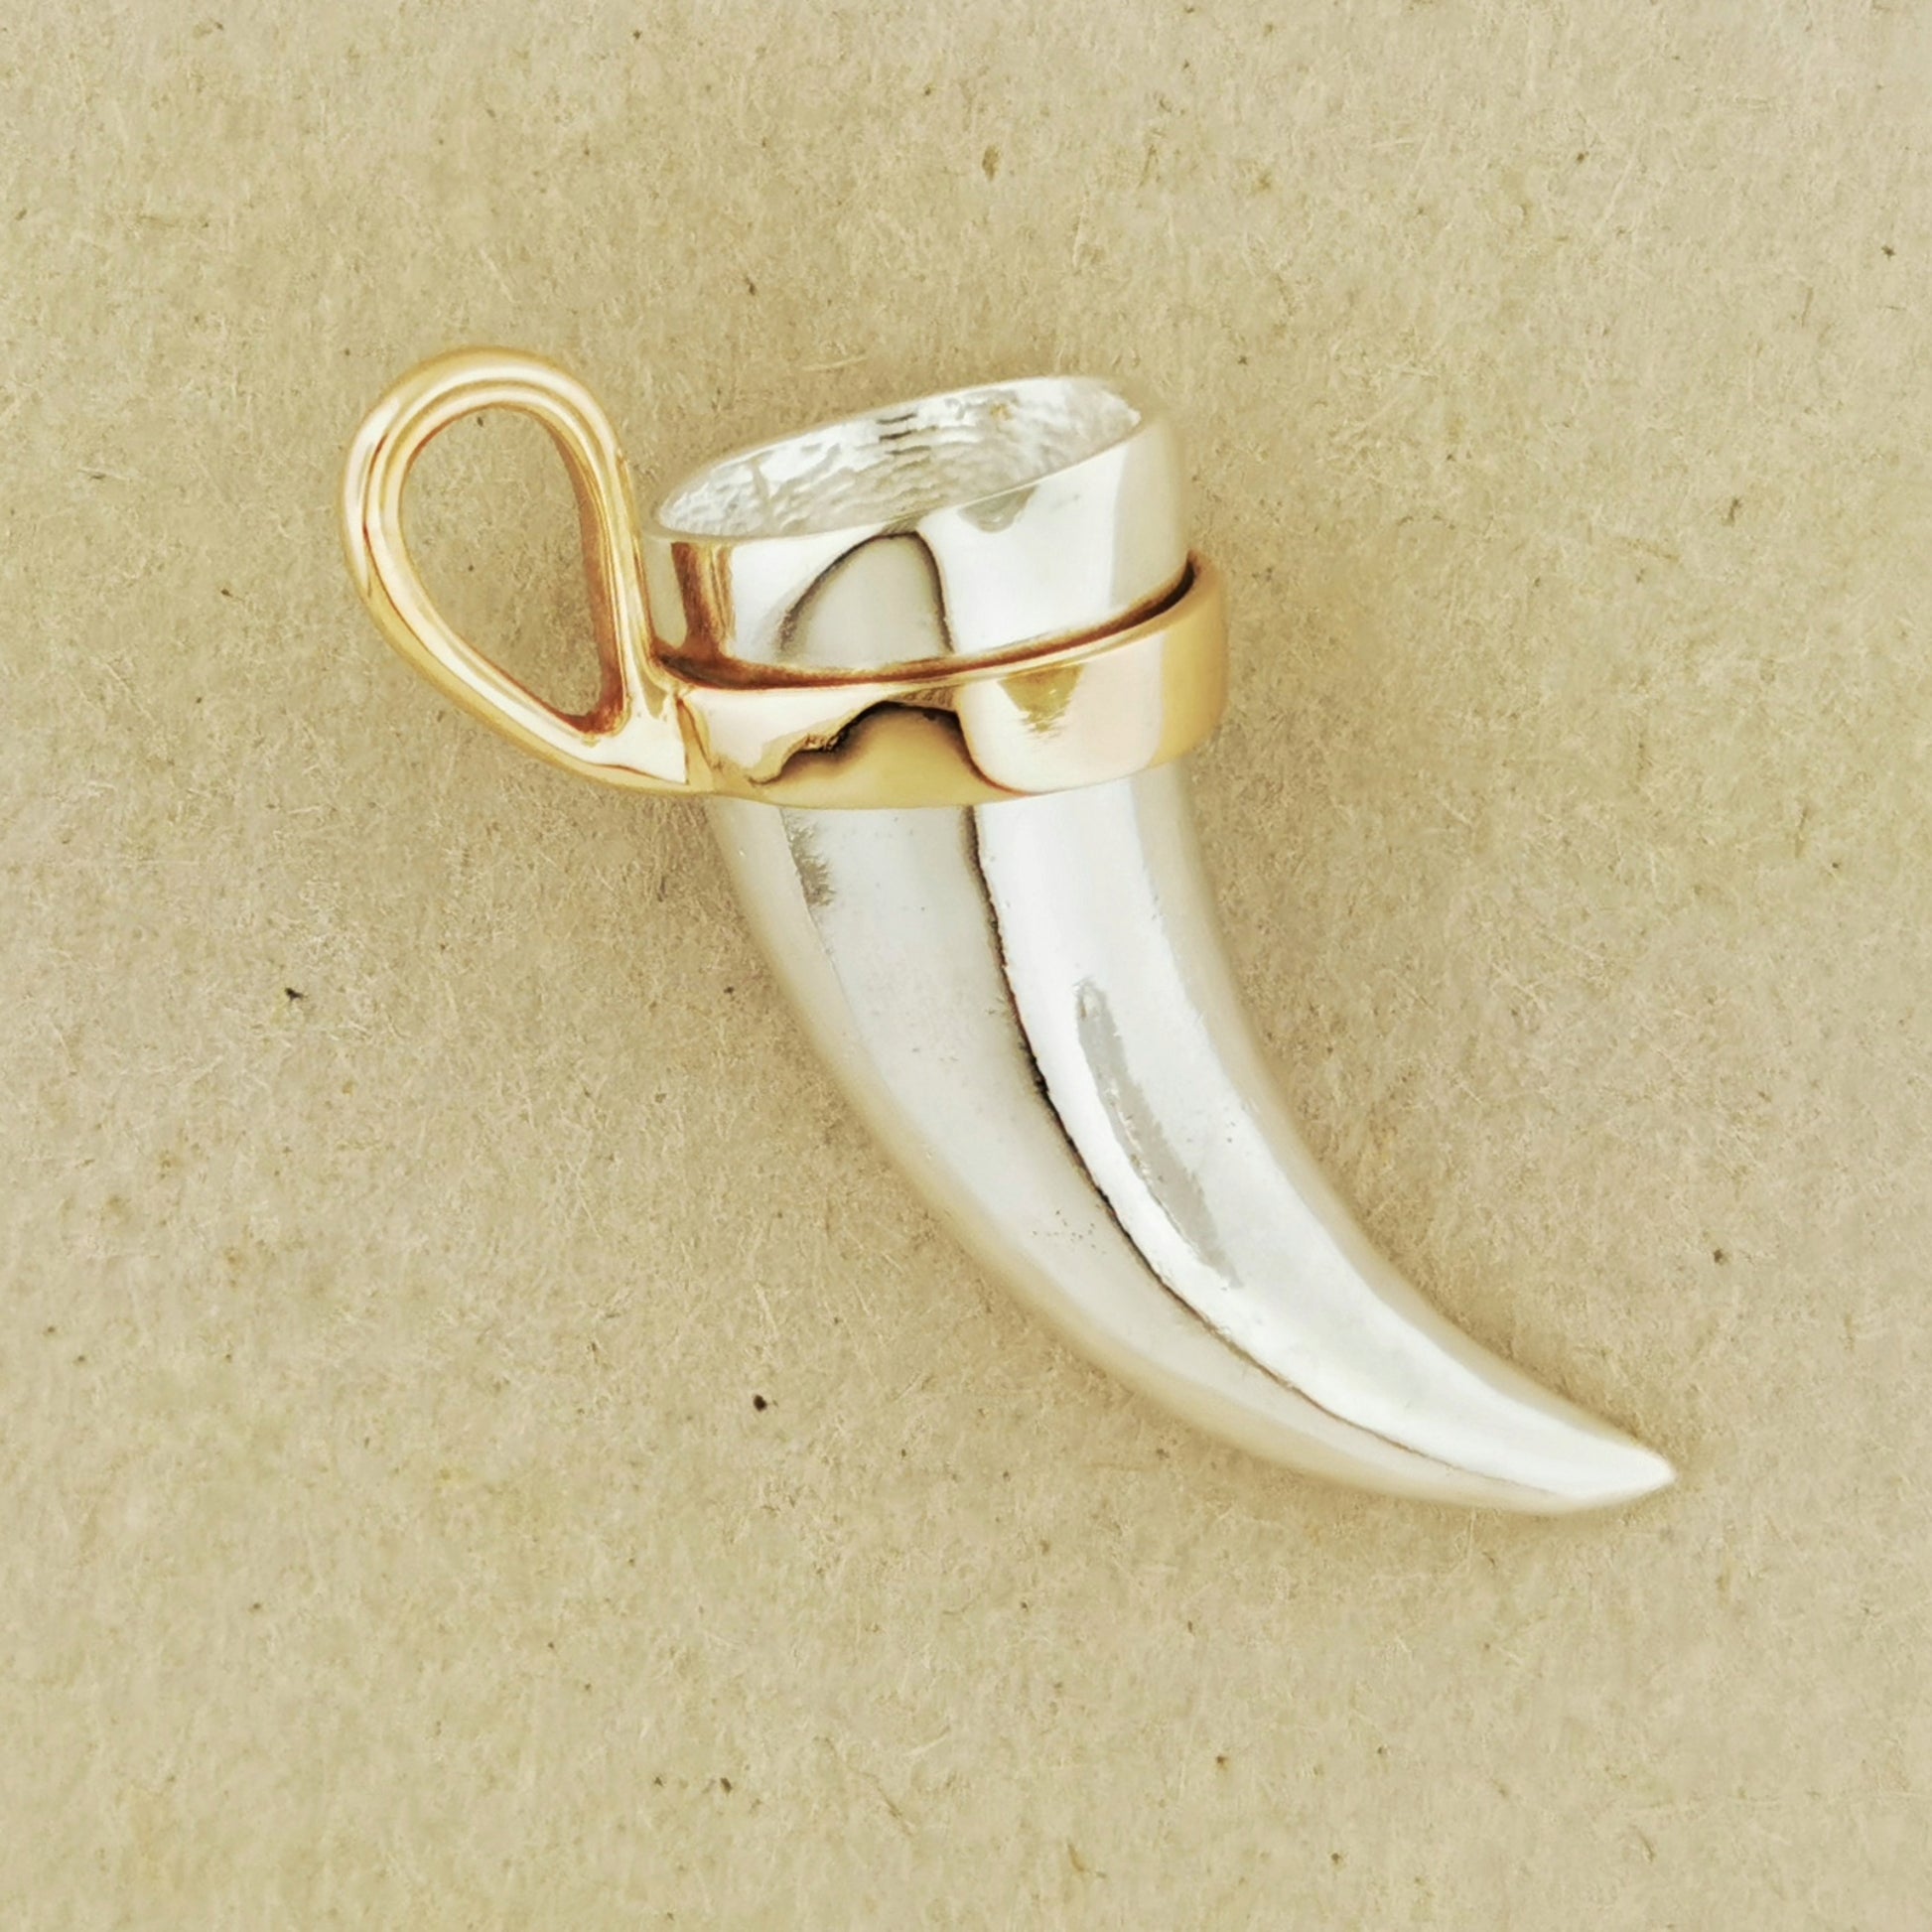 Sterling Silver and Antique Bronze Viking Drinking Horn Pendant, Viking drinking Horn, Viking Horn Pendant, Drinking Horn Pendant, Norse Horn Pendant, Silver Viking Pendant, Mead Horn Pendant, LARP jewelry, LARP jewellery, Two Tone Horn Pendant, Silver Driking Horn Pendant, Silver Norse Pendant, Sterling Silver Viking Jewelry, Sterling Silver Viking Jewellery